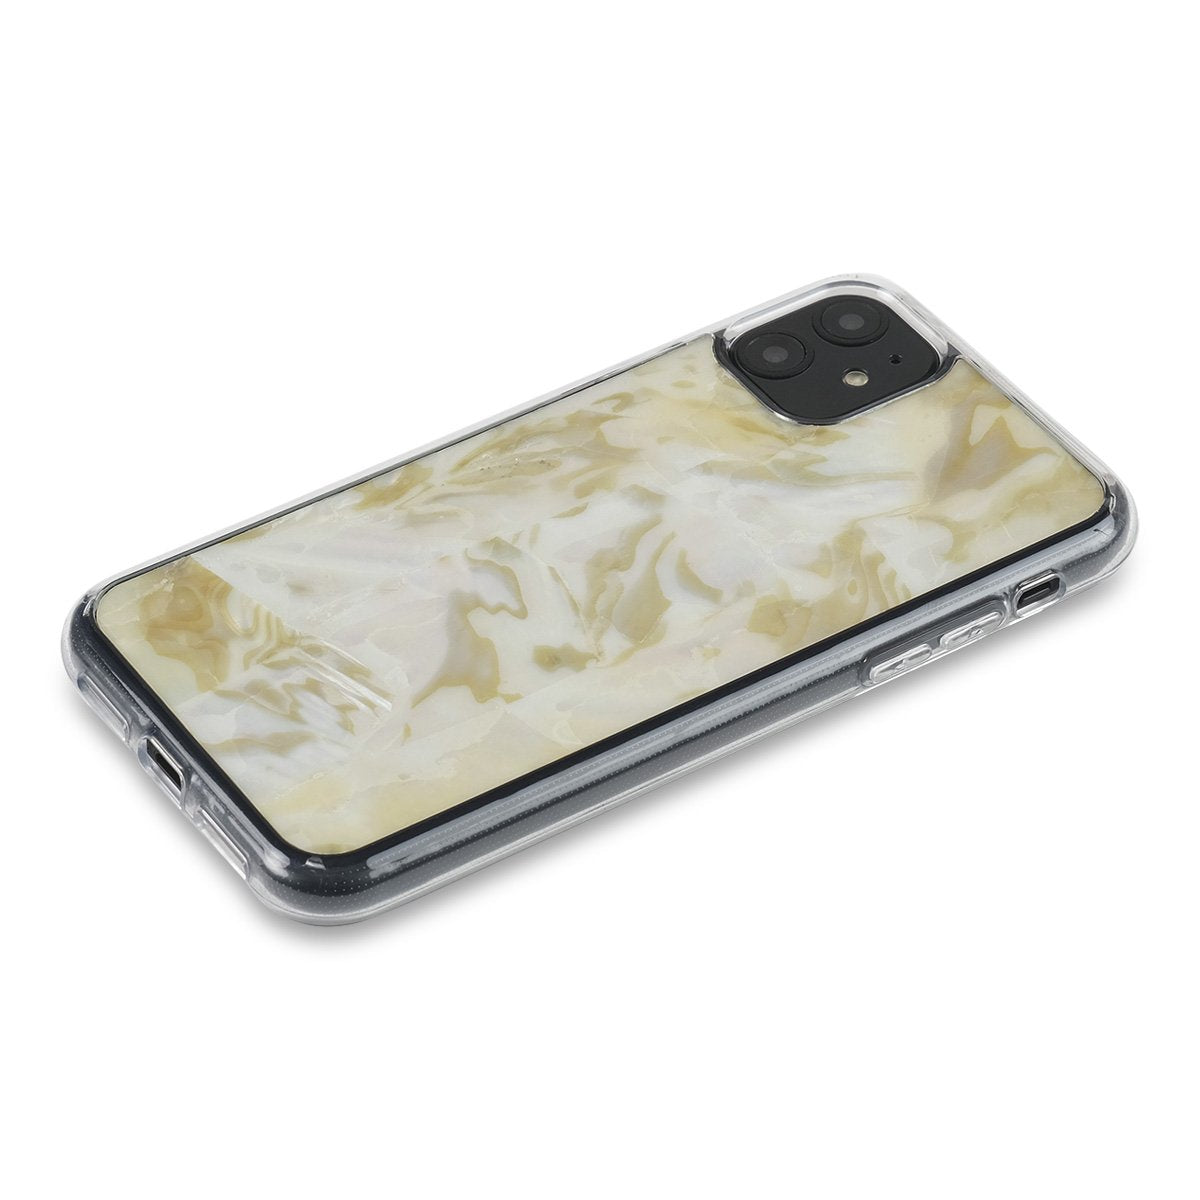 iPhone 11 Pro — Shell Explorer Clear Case